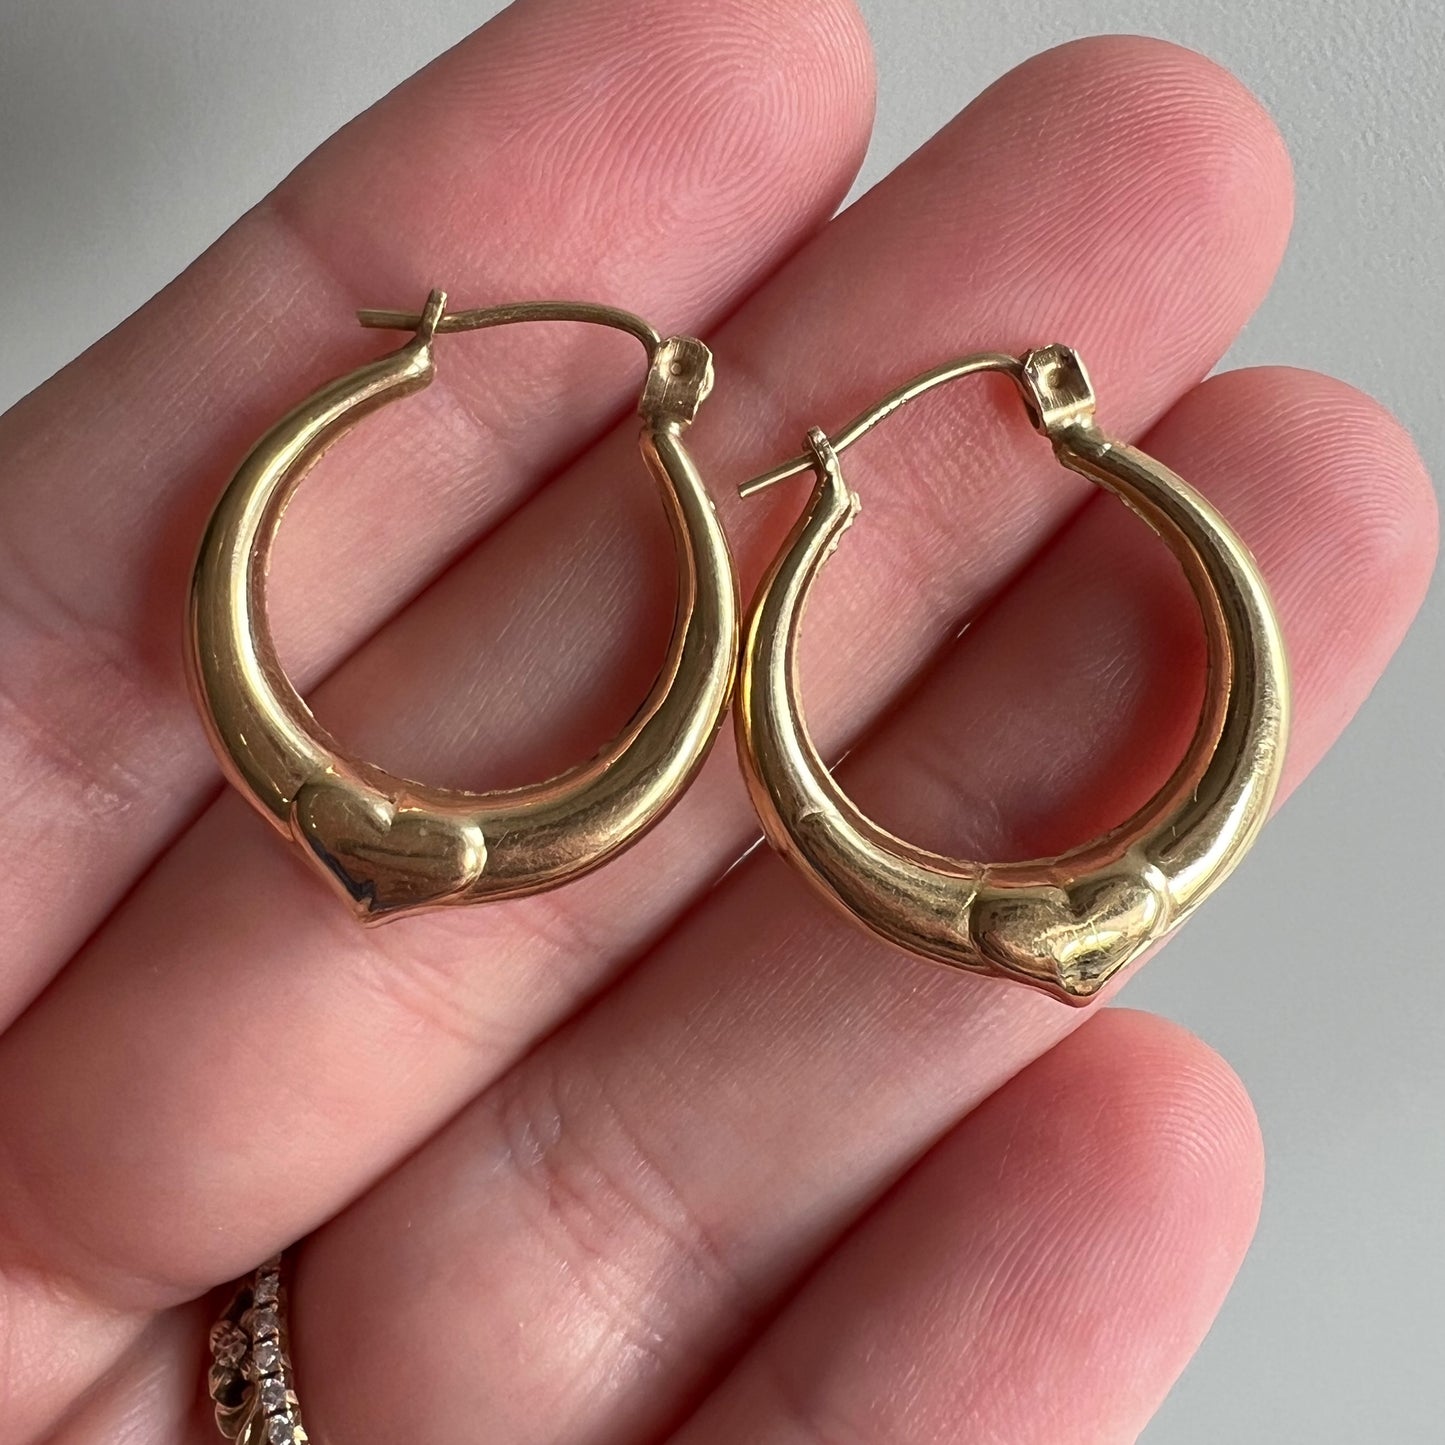 V I N T A G E // suspended love / 14k yellow gold with hearts / hoop earrings